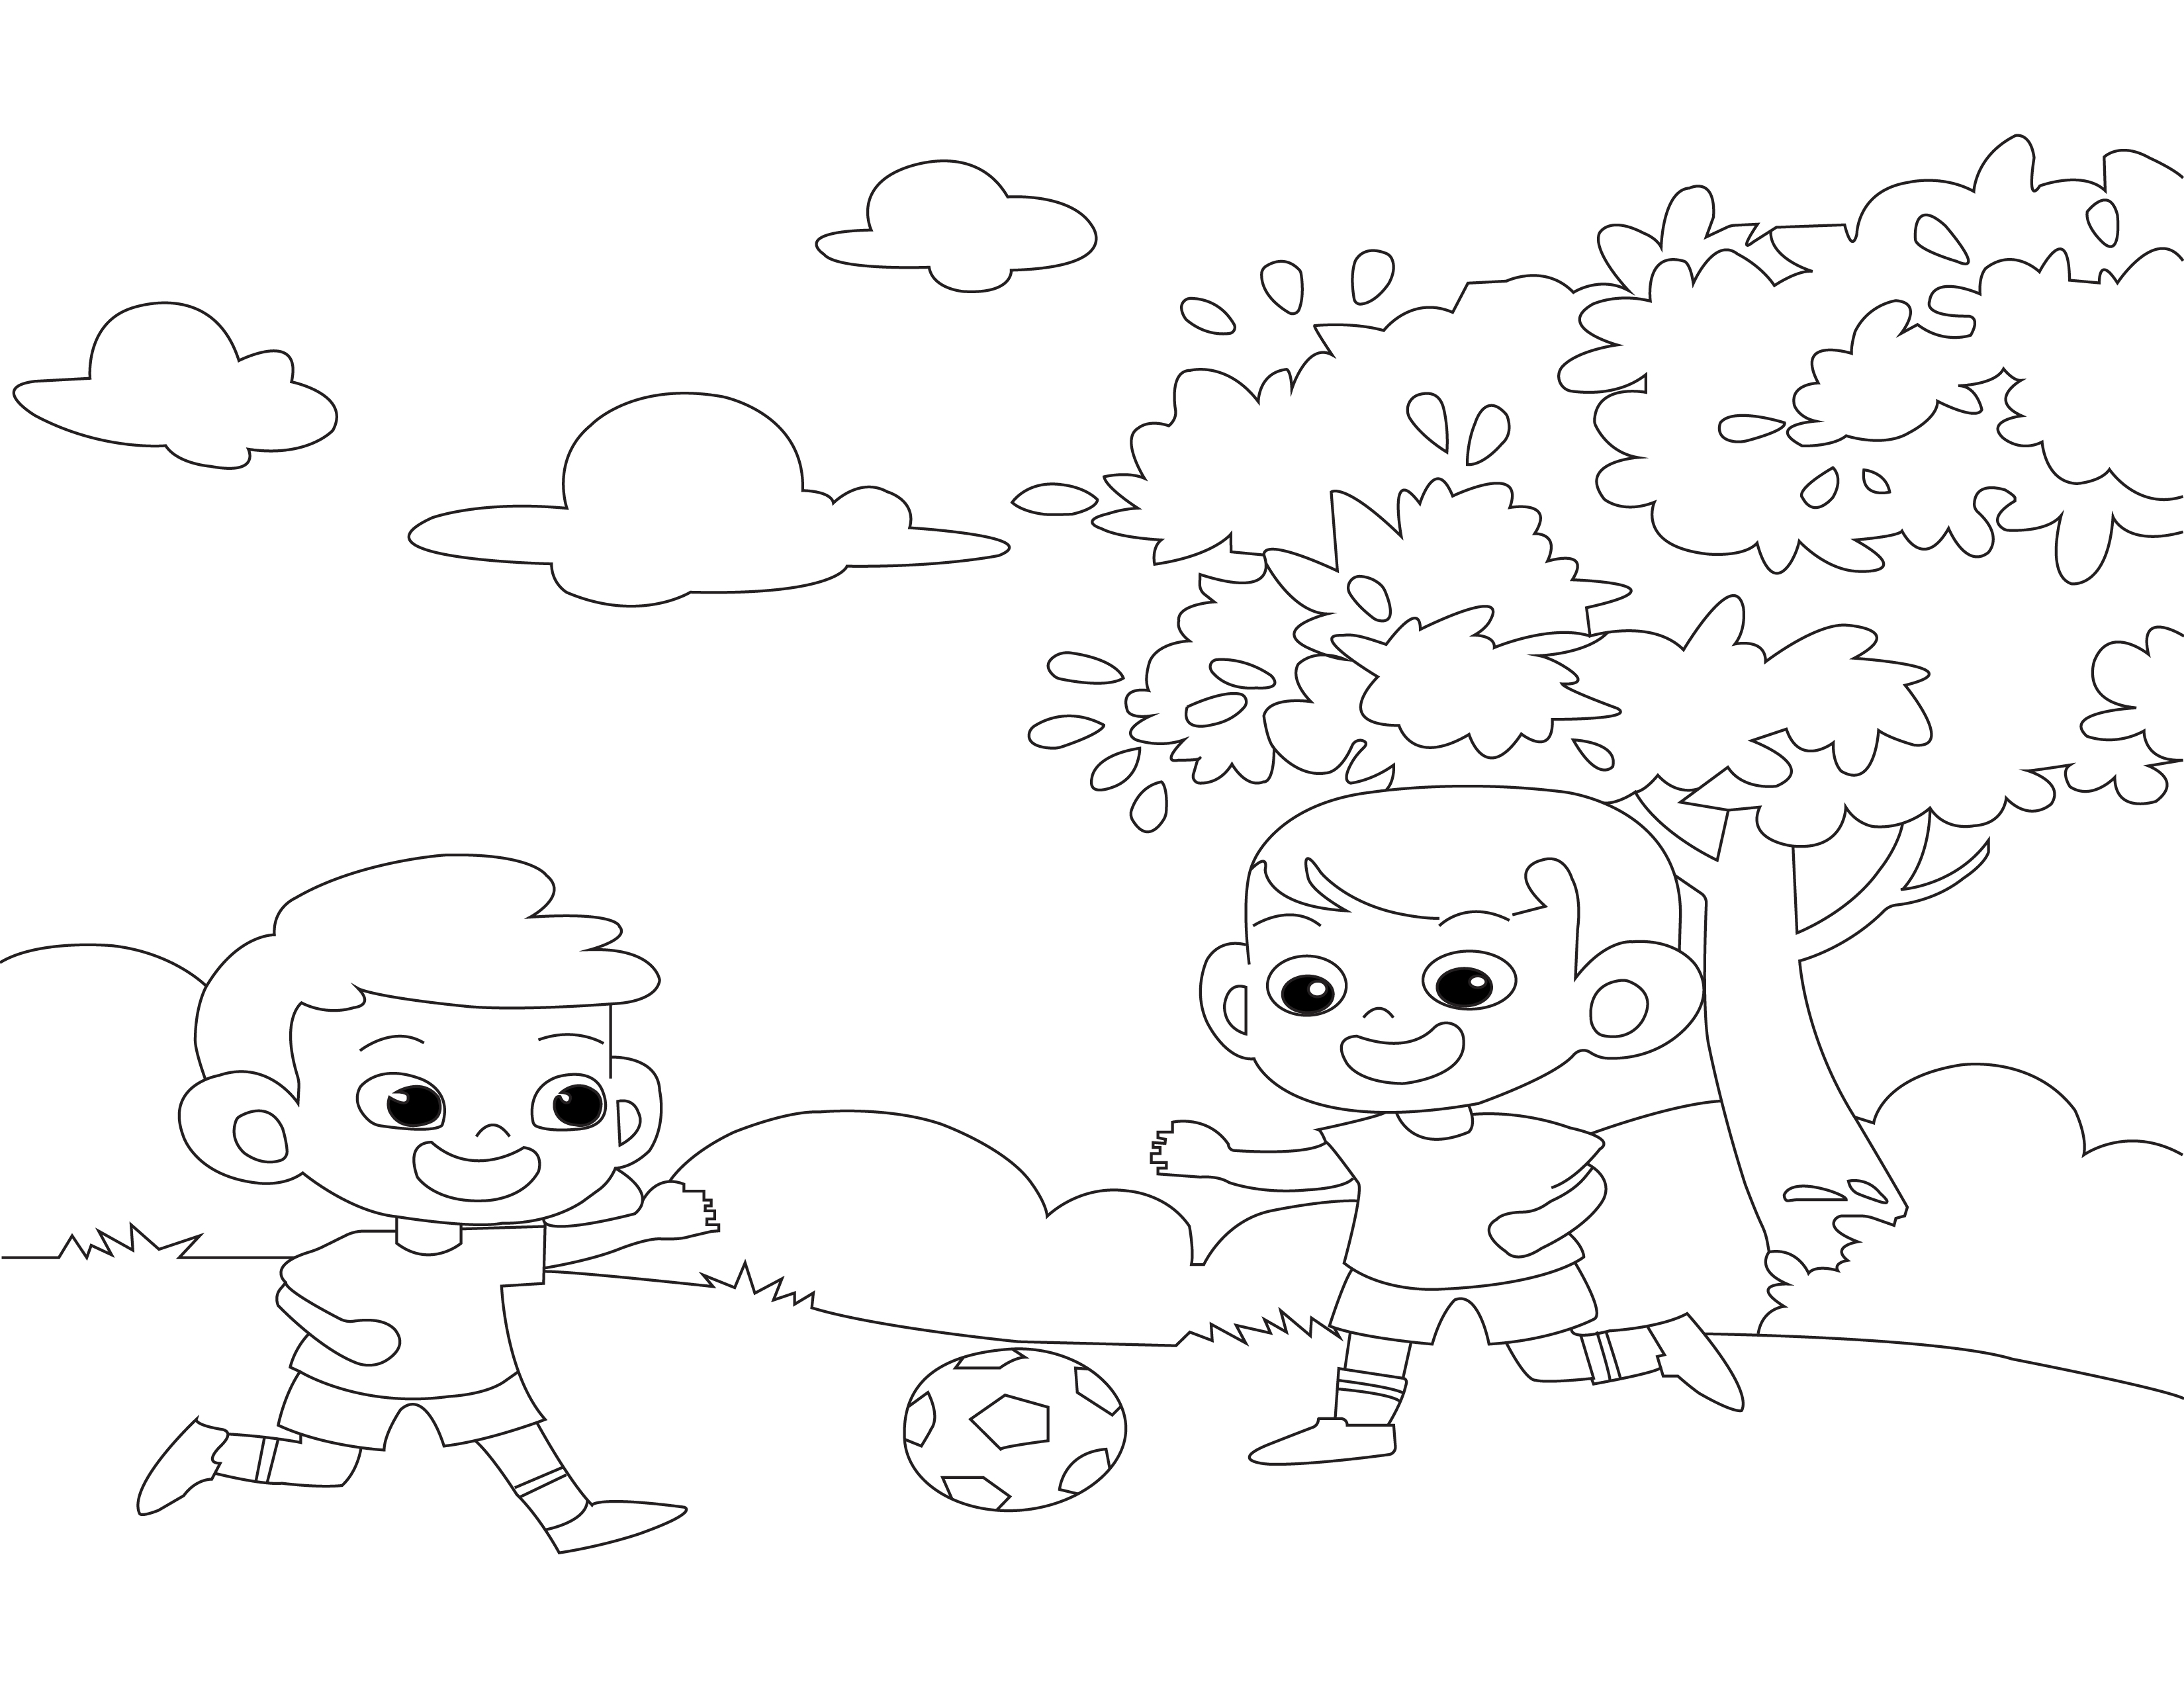 Coloring page of child playing soccer